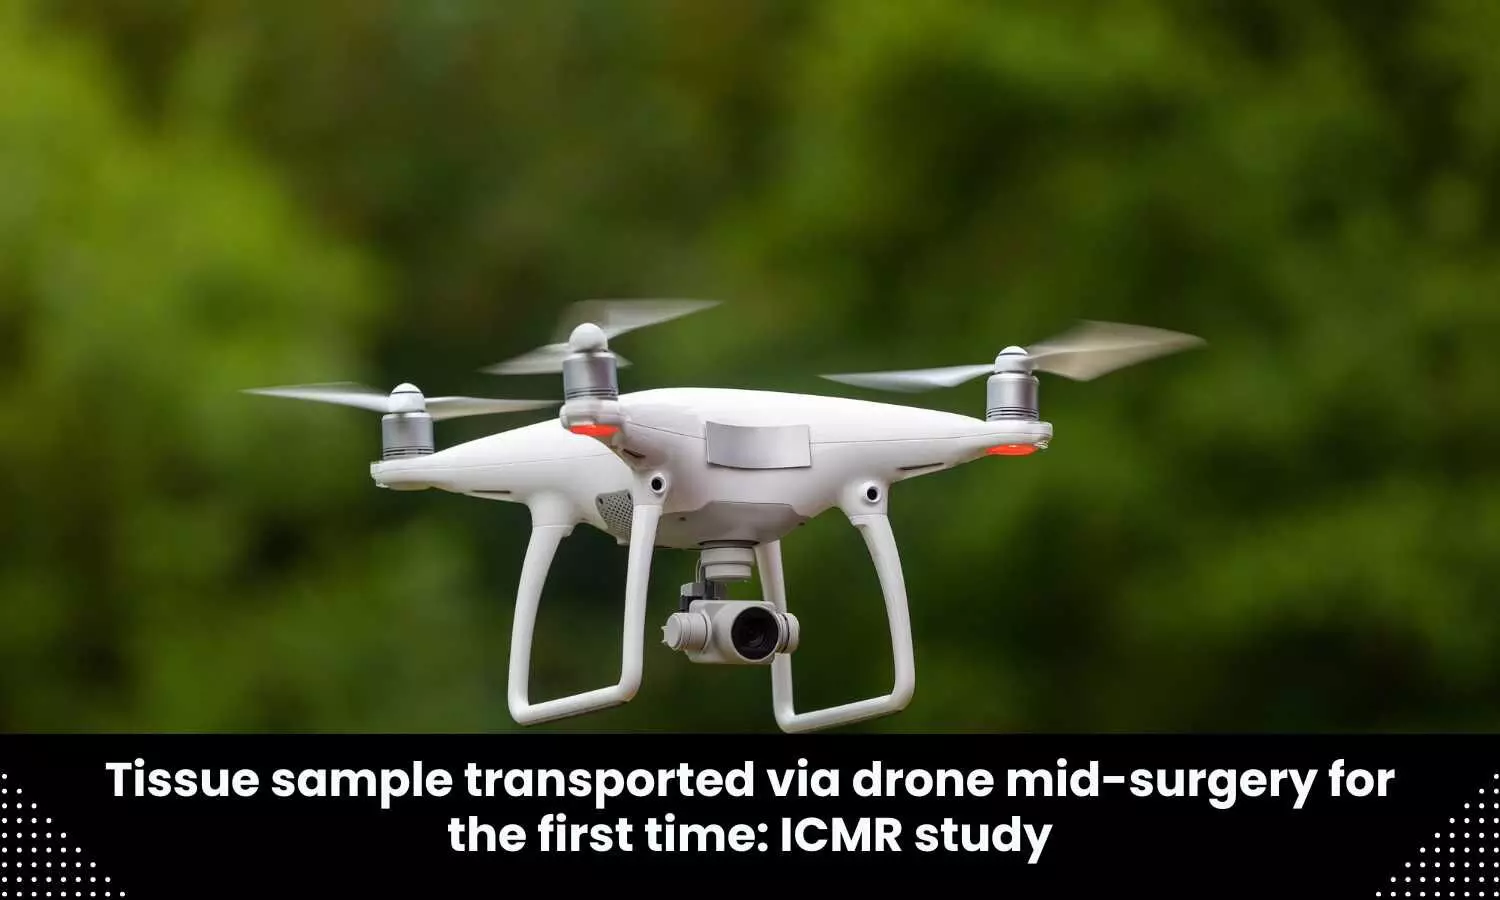 Mid-Surgery tissue sample transported via drone for Pathological Testing